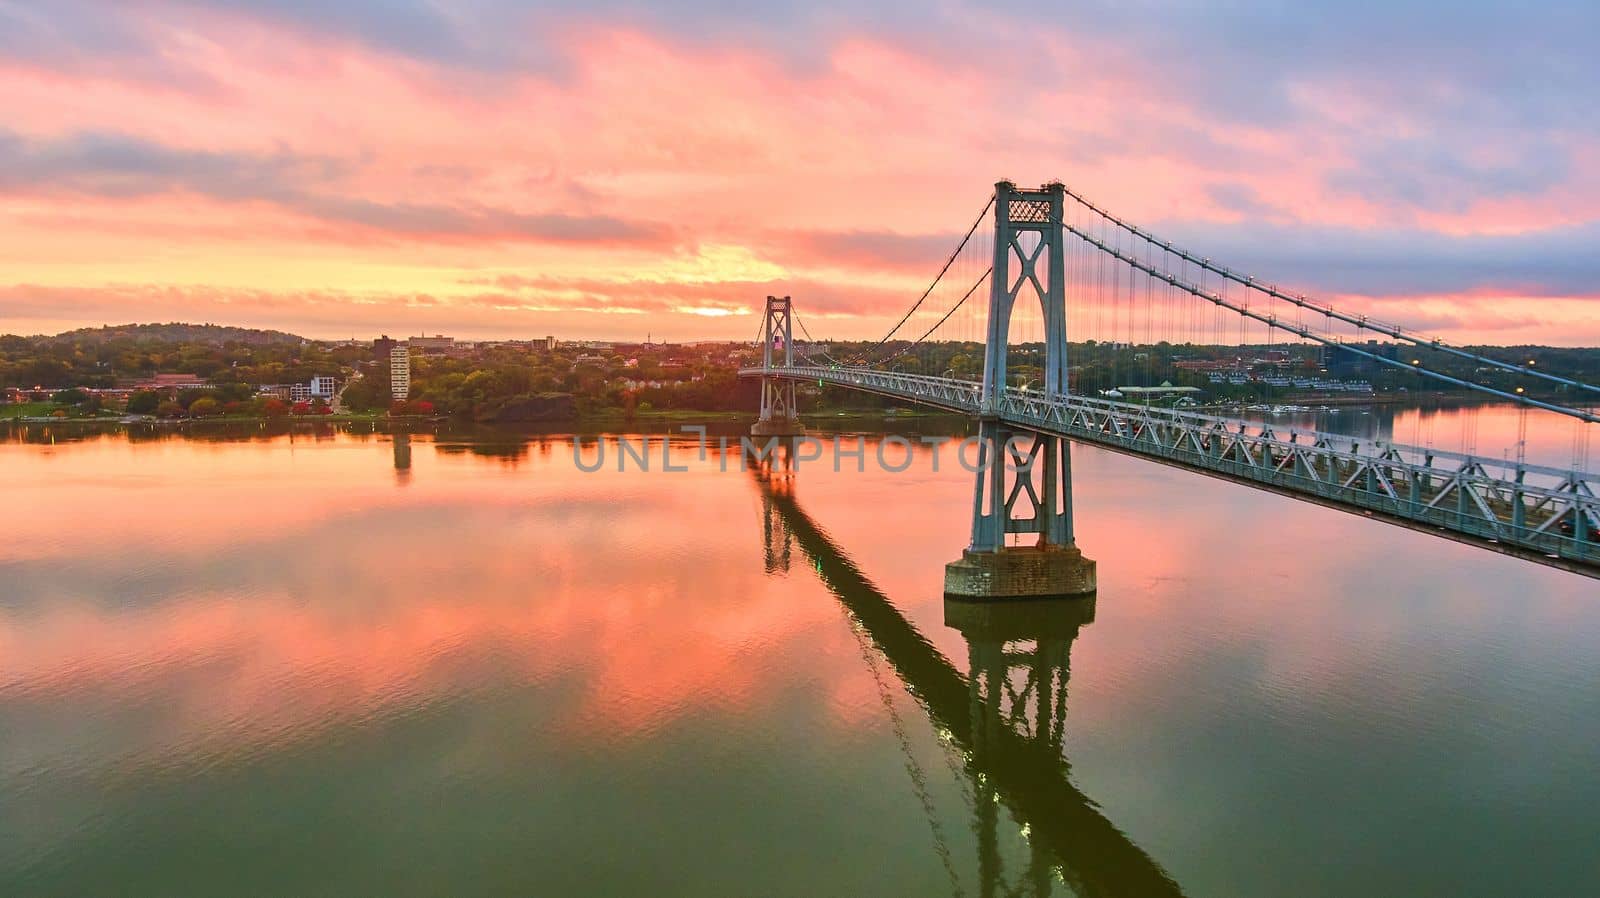 Aerial golden hour sunrise over stunning American New York bridge with pink light by njproductions